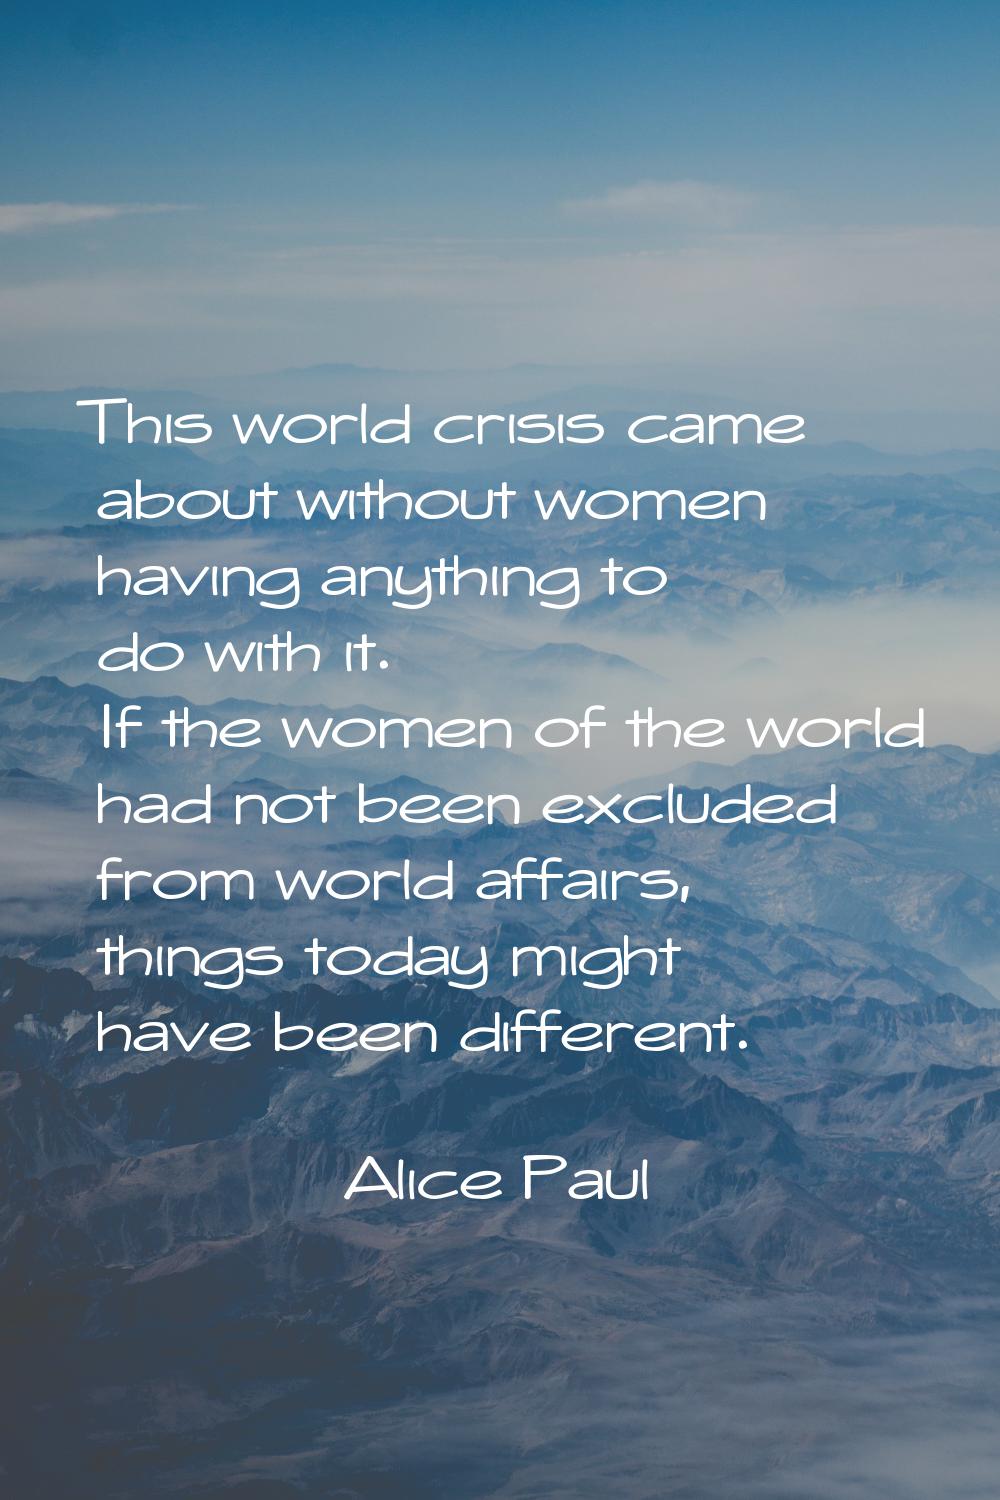 This world crisis came about without women having anything to do with it. If the women of the world